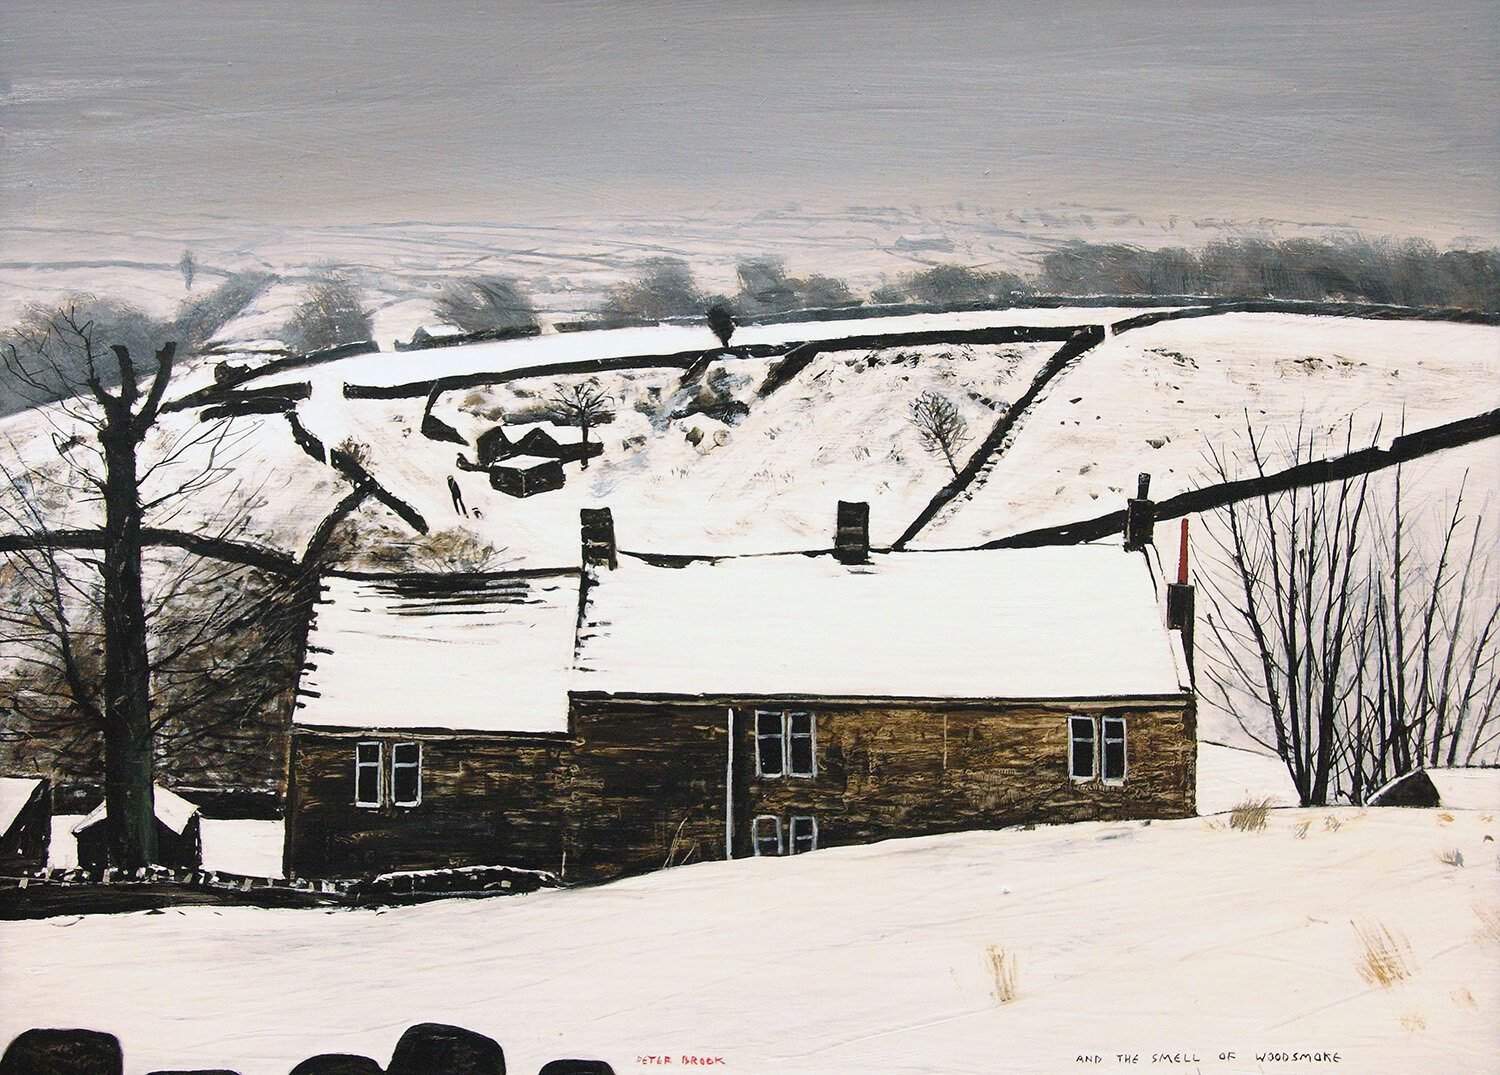 'And the smell of woodsmoke' by Peter Brook